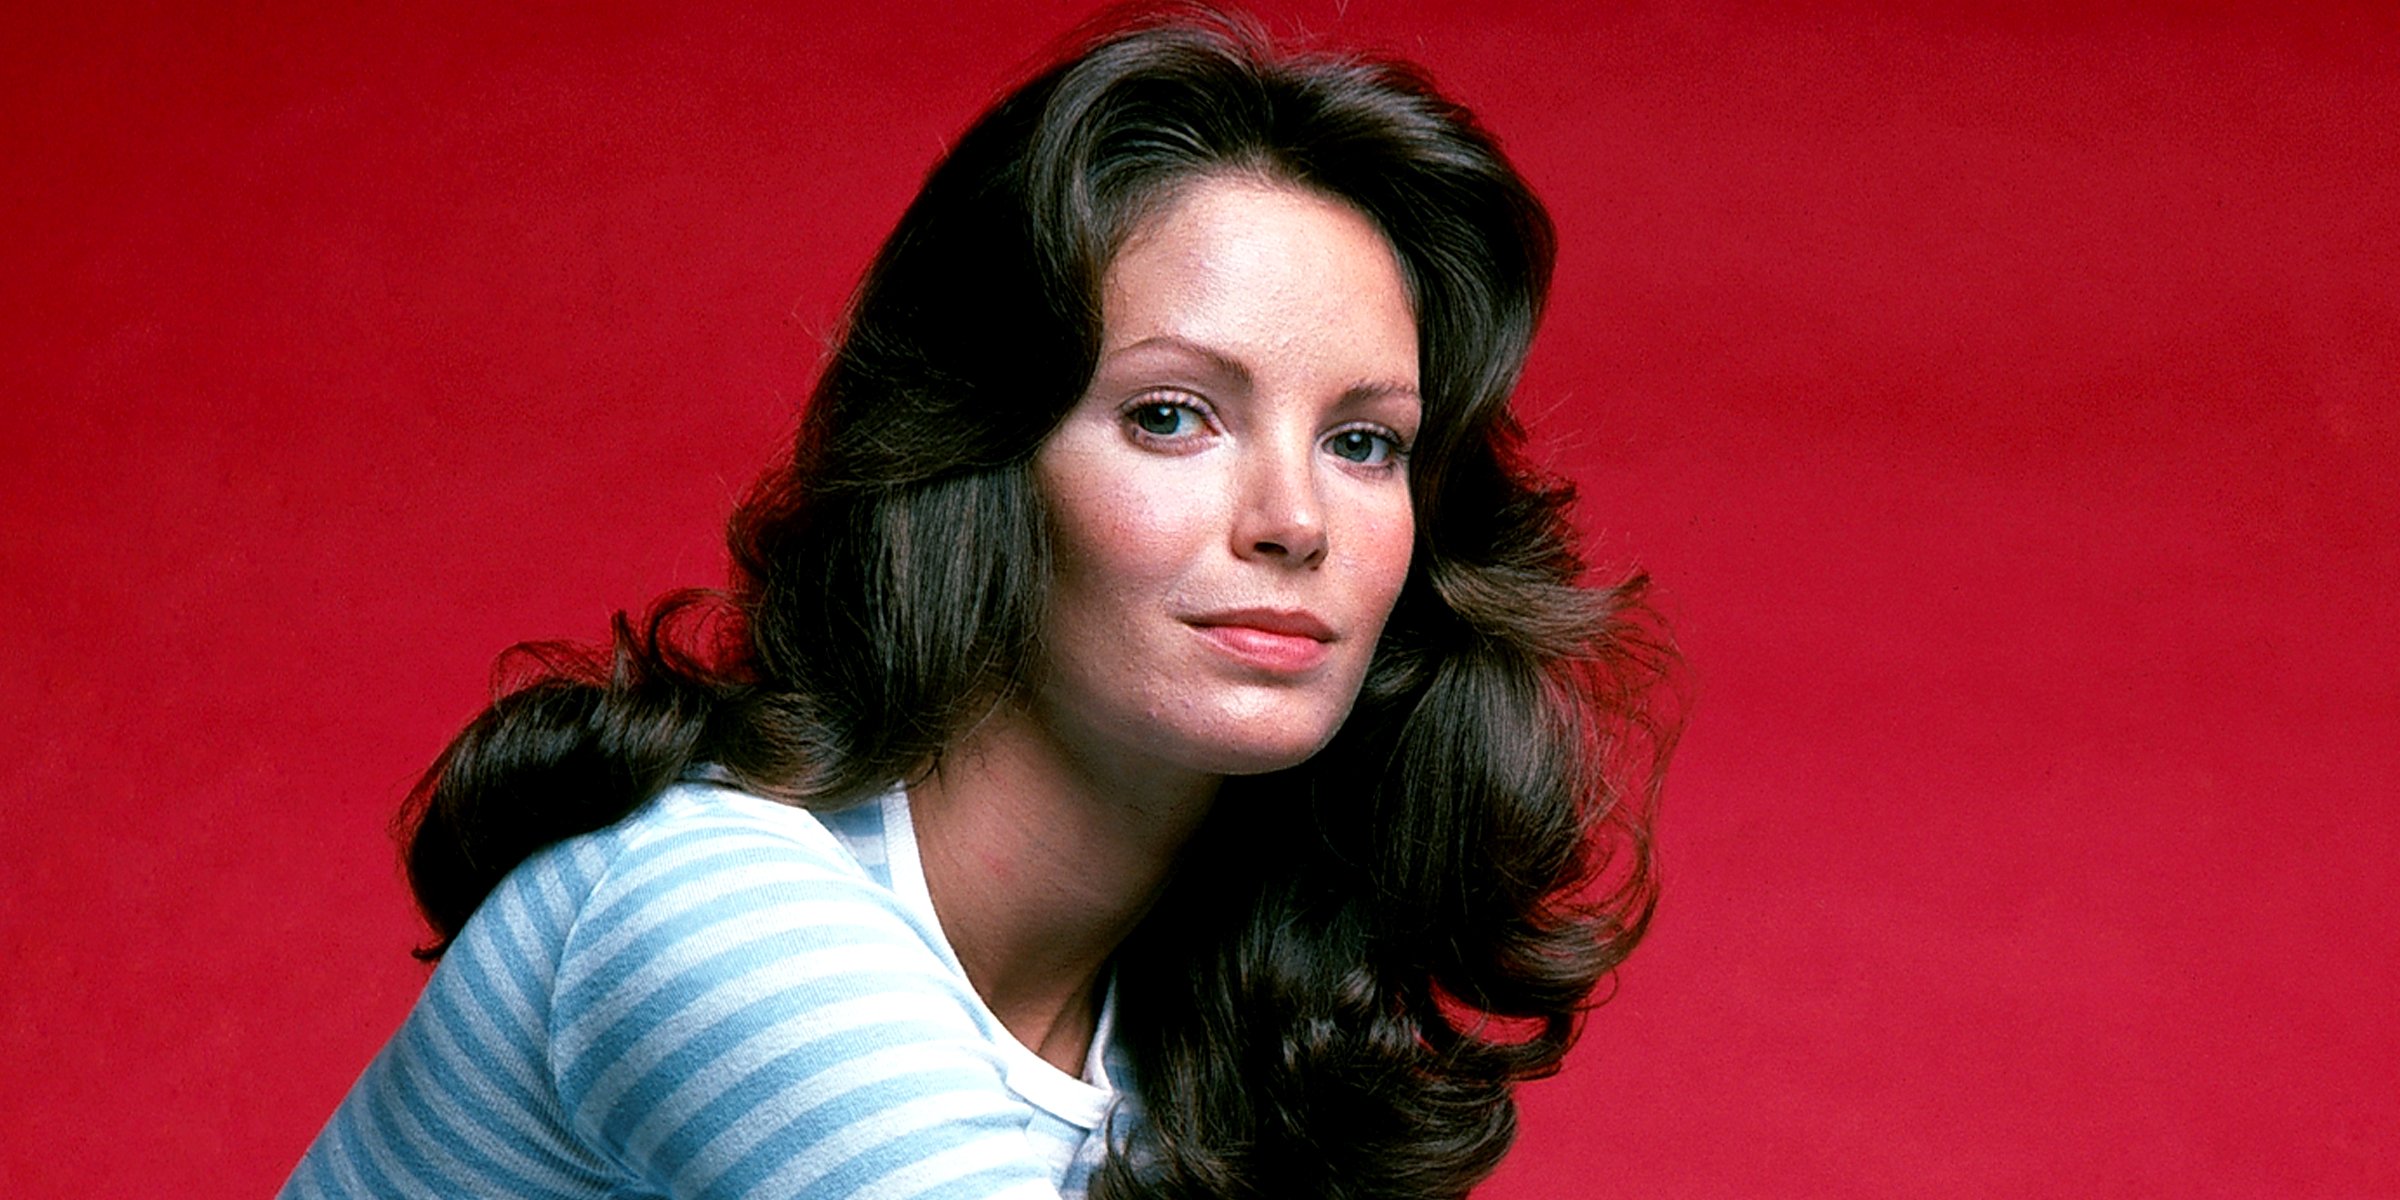 Jaclyn Smith | Getty Images